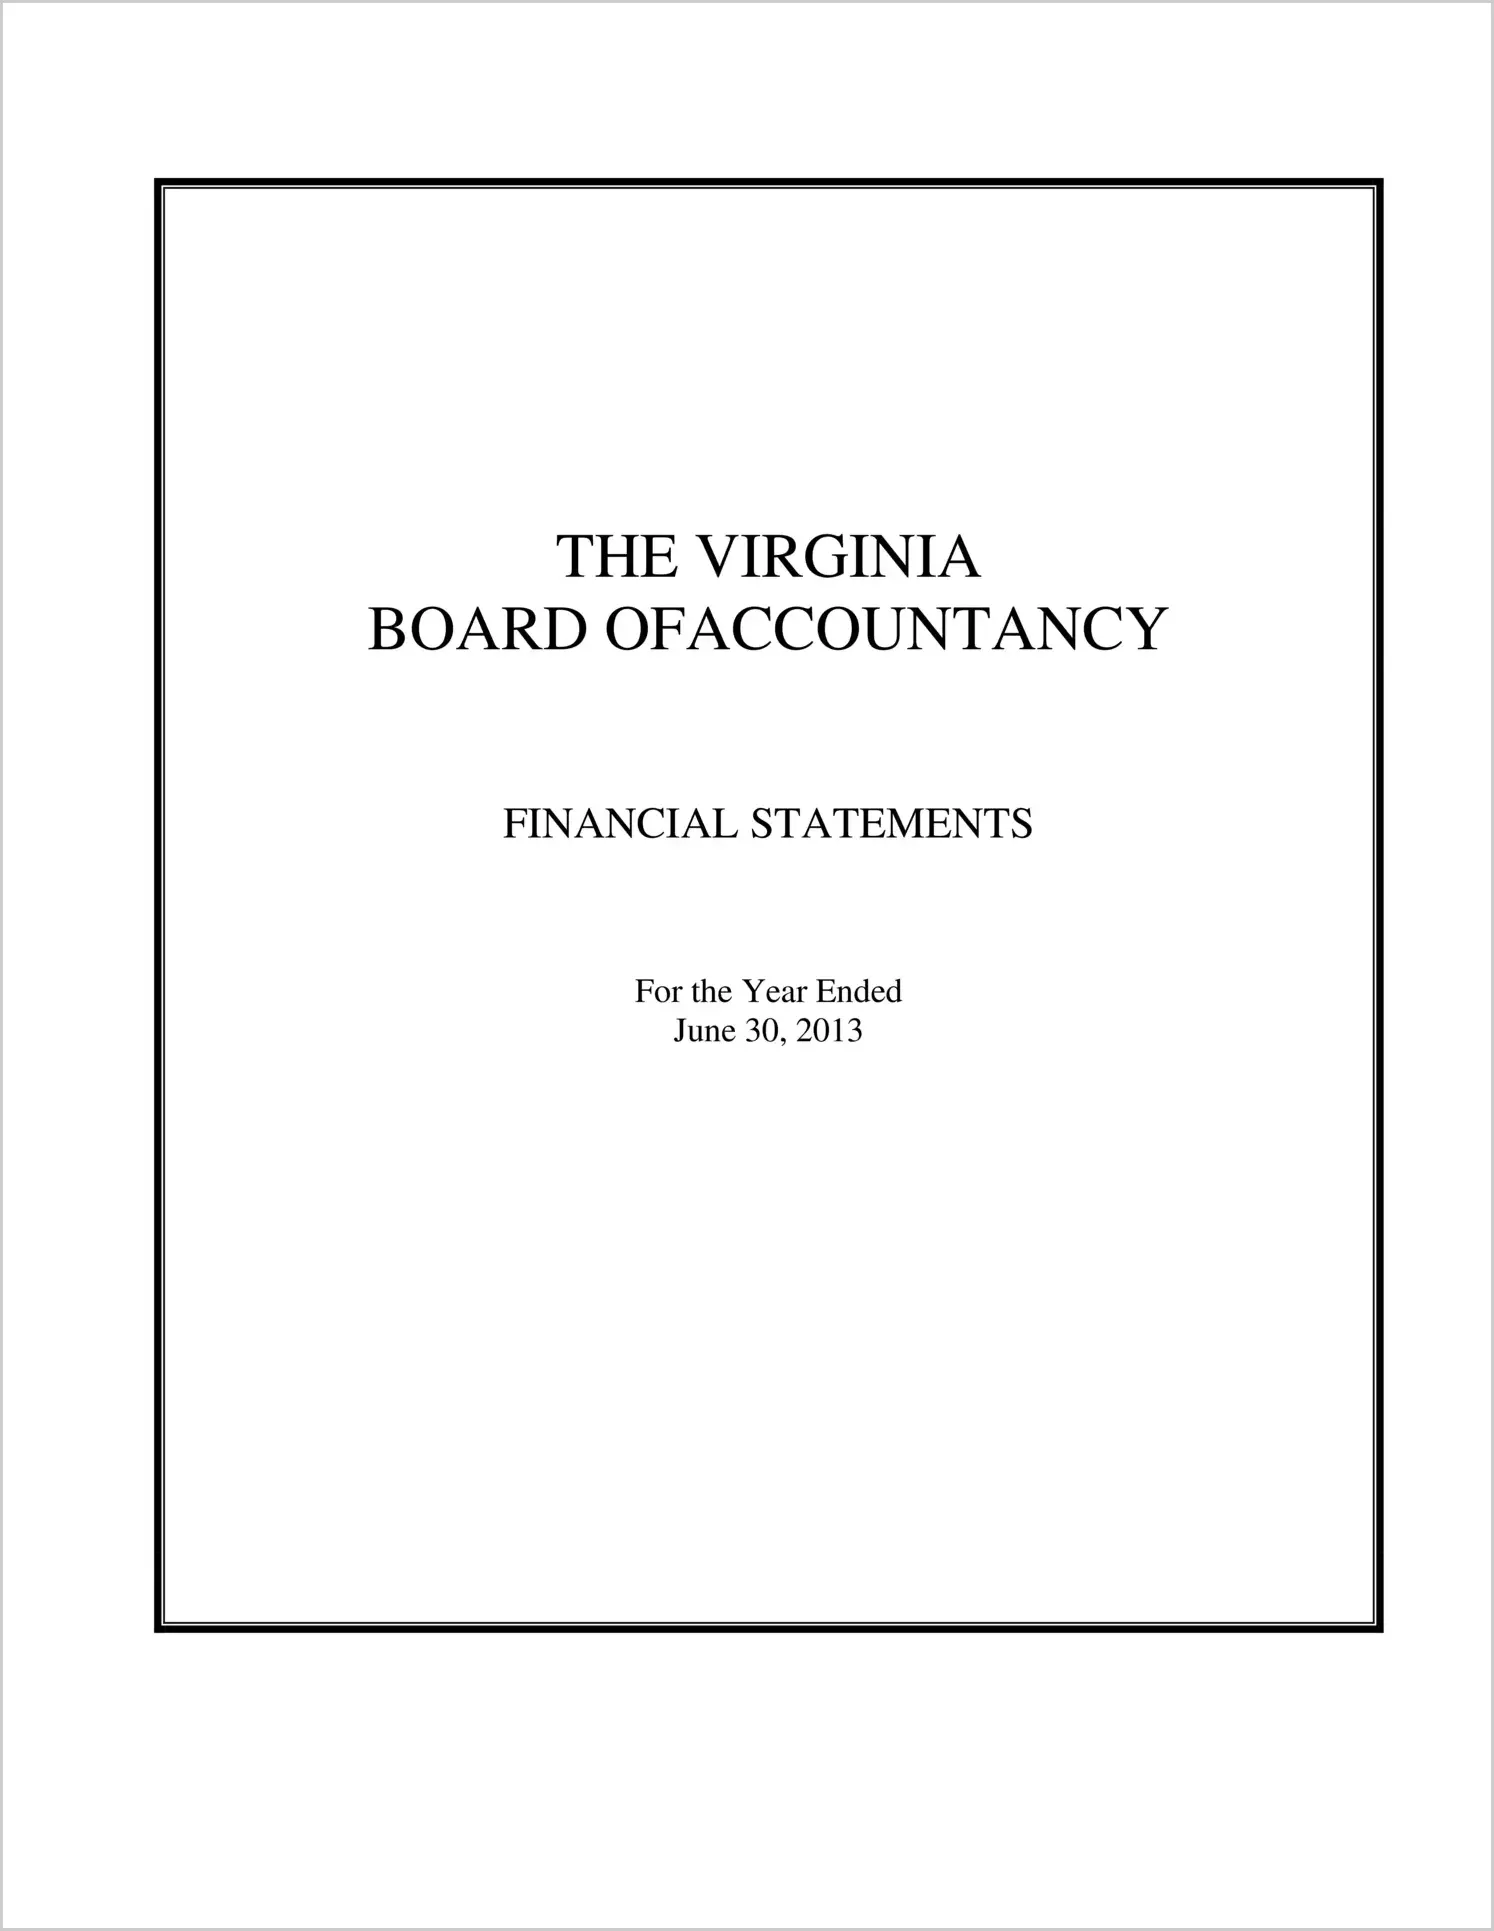 Virginia Board of Accountancy Financial Statements for the year ended June 30, 2013